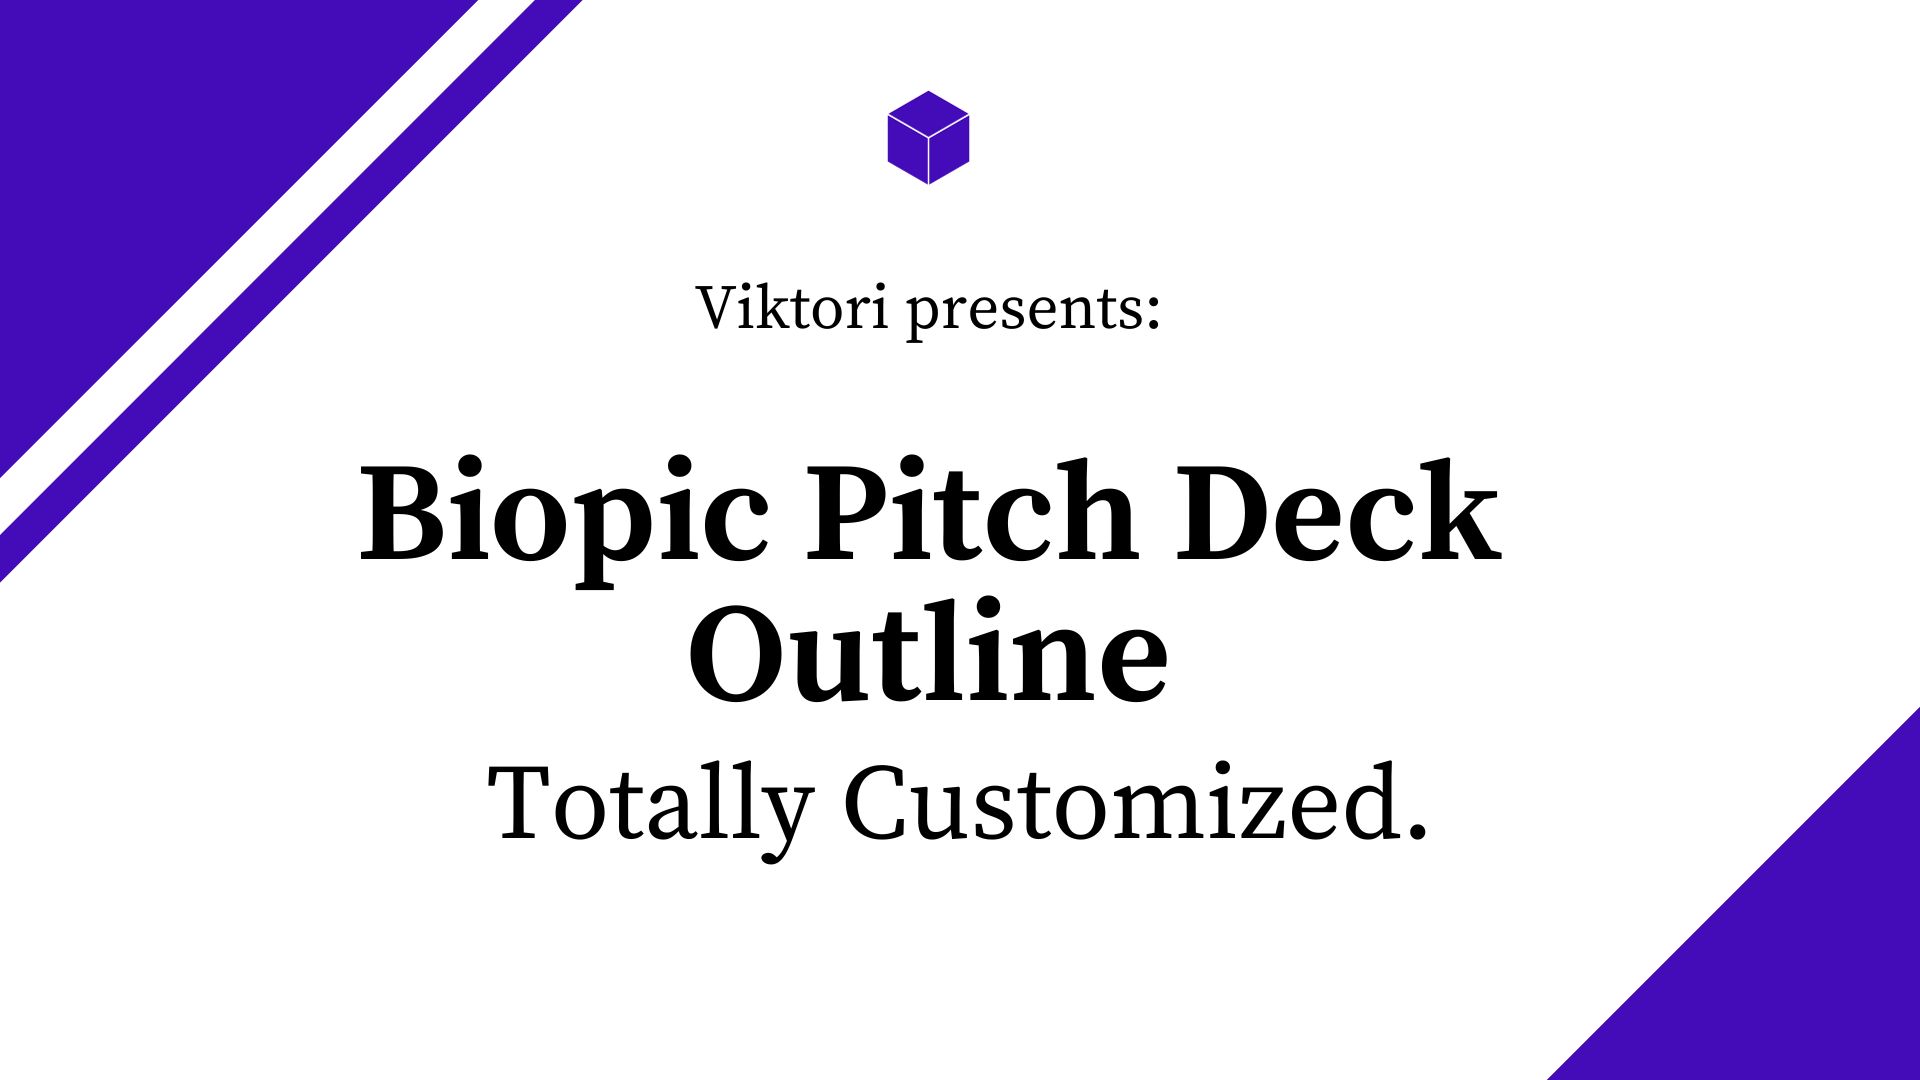 biopic pitch deck outline